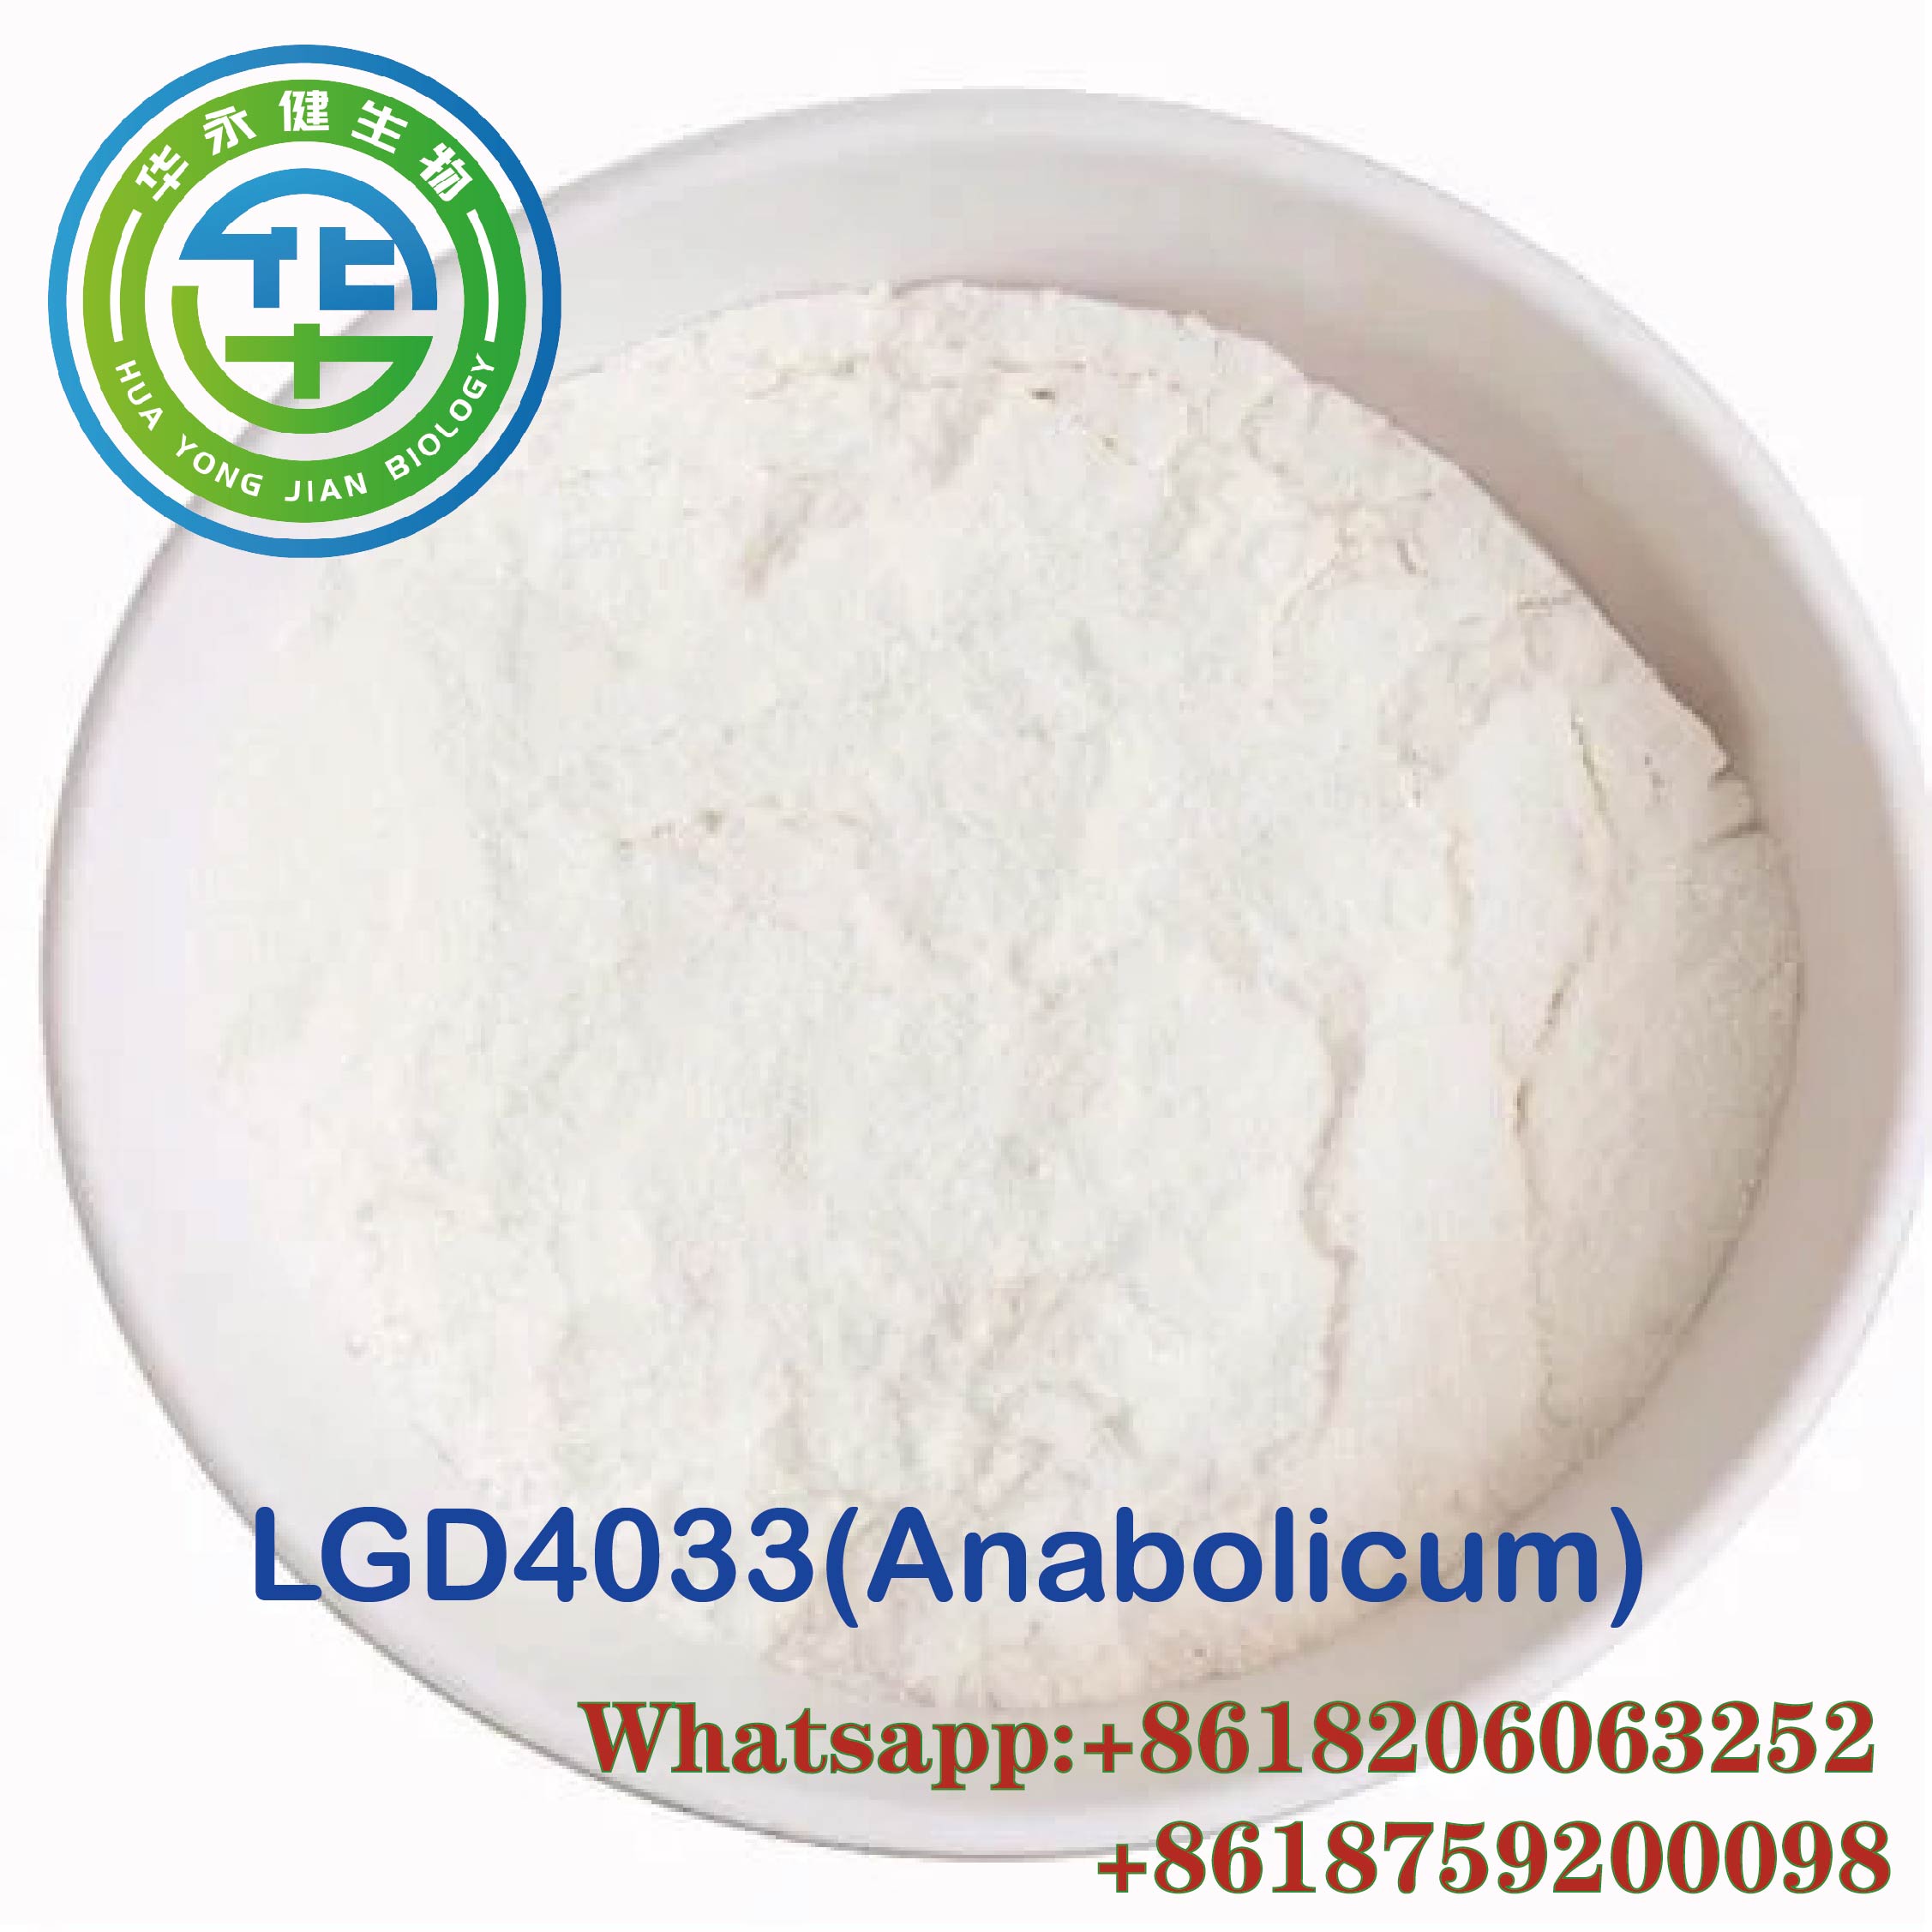 LGD-4033 Powder SARMs Steroids For Weight Loss Fat Burning 